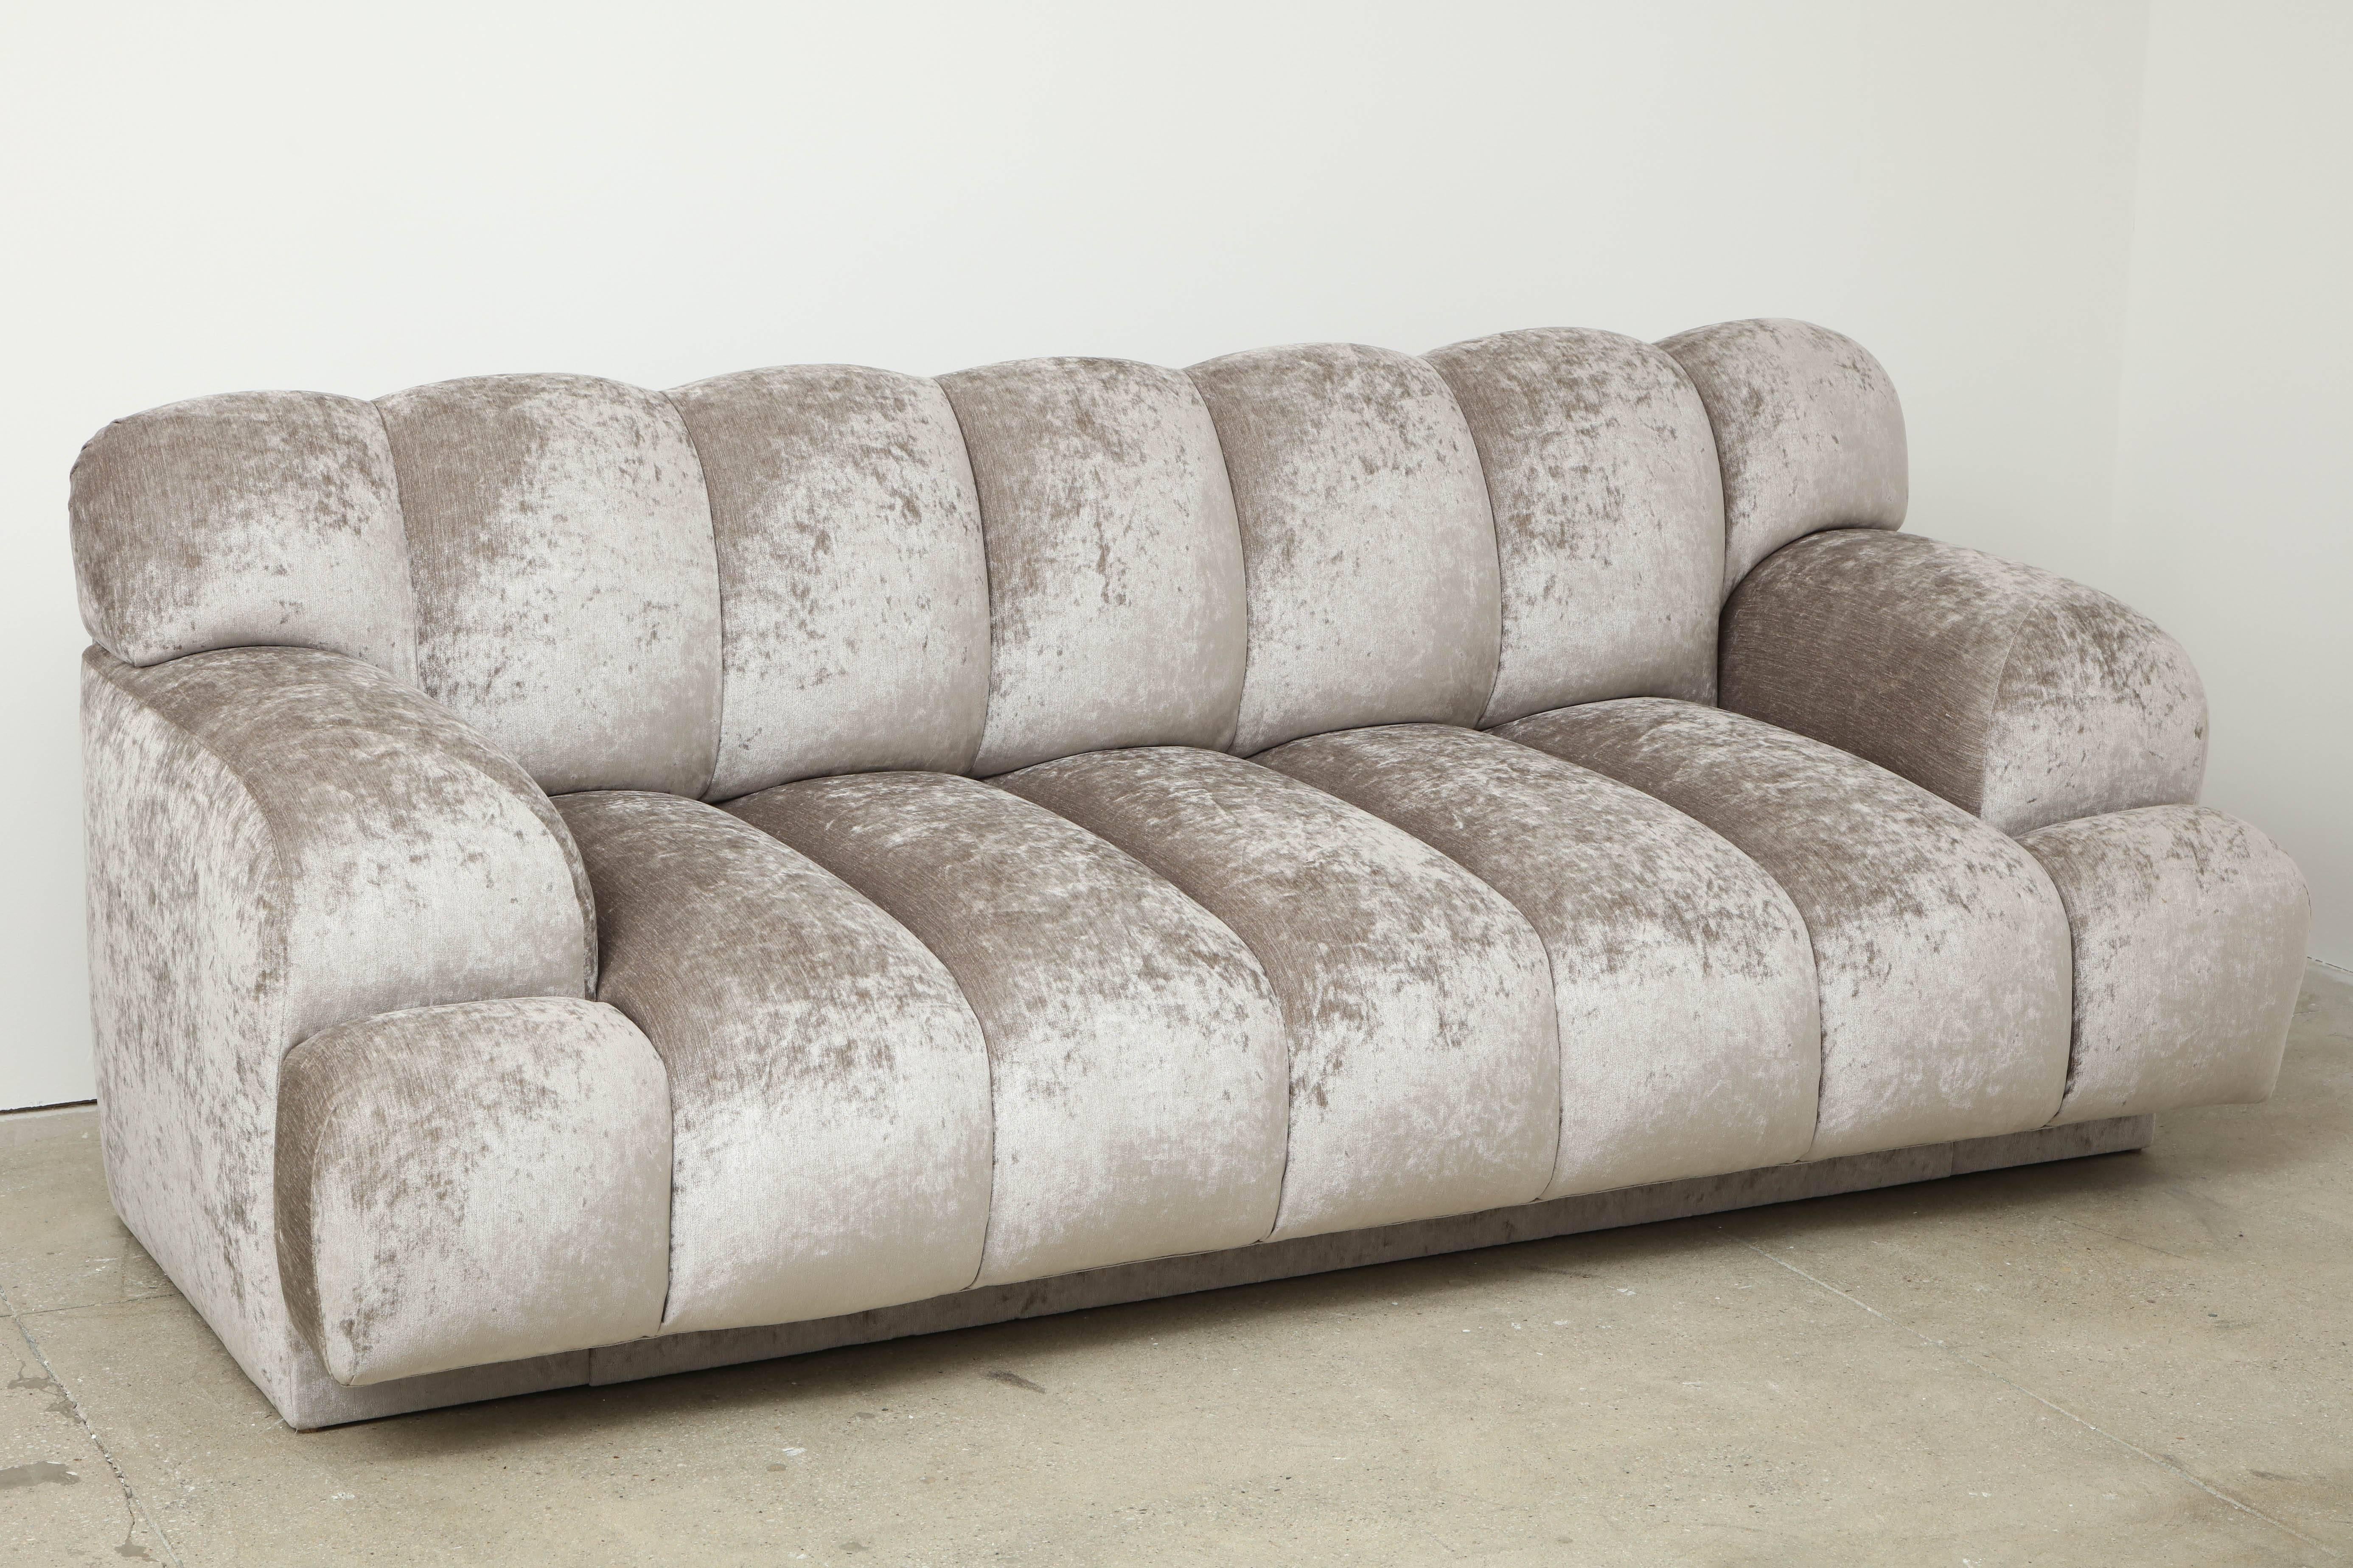 Glamorous channel tufted sofa by Steve Chase.
The chic sofa has been newly reupholstered in a luxurious silvery grey chenille velvet. The sofa is accompanied by two matching pillows.